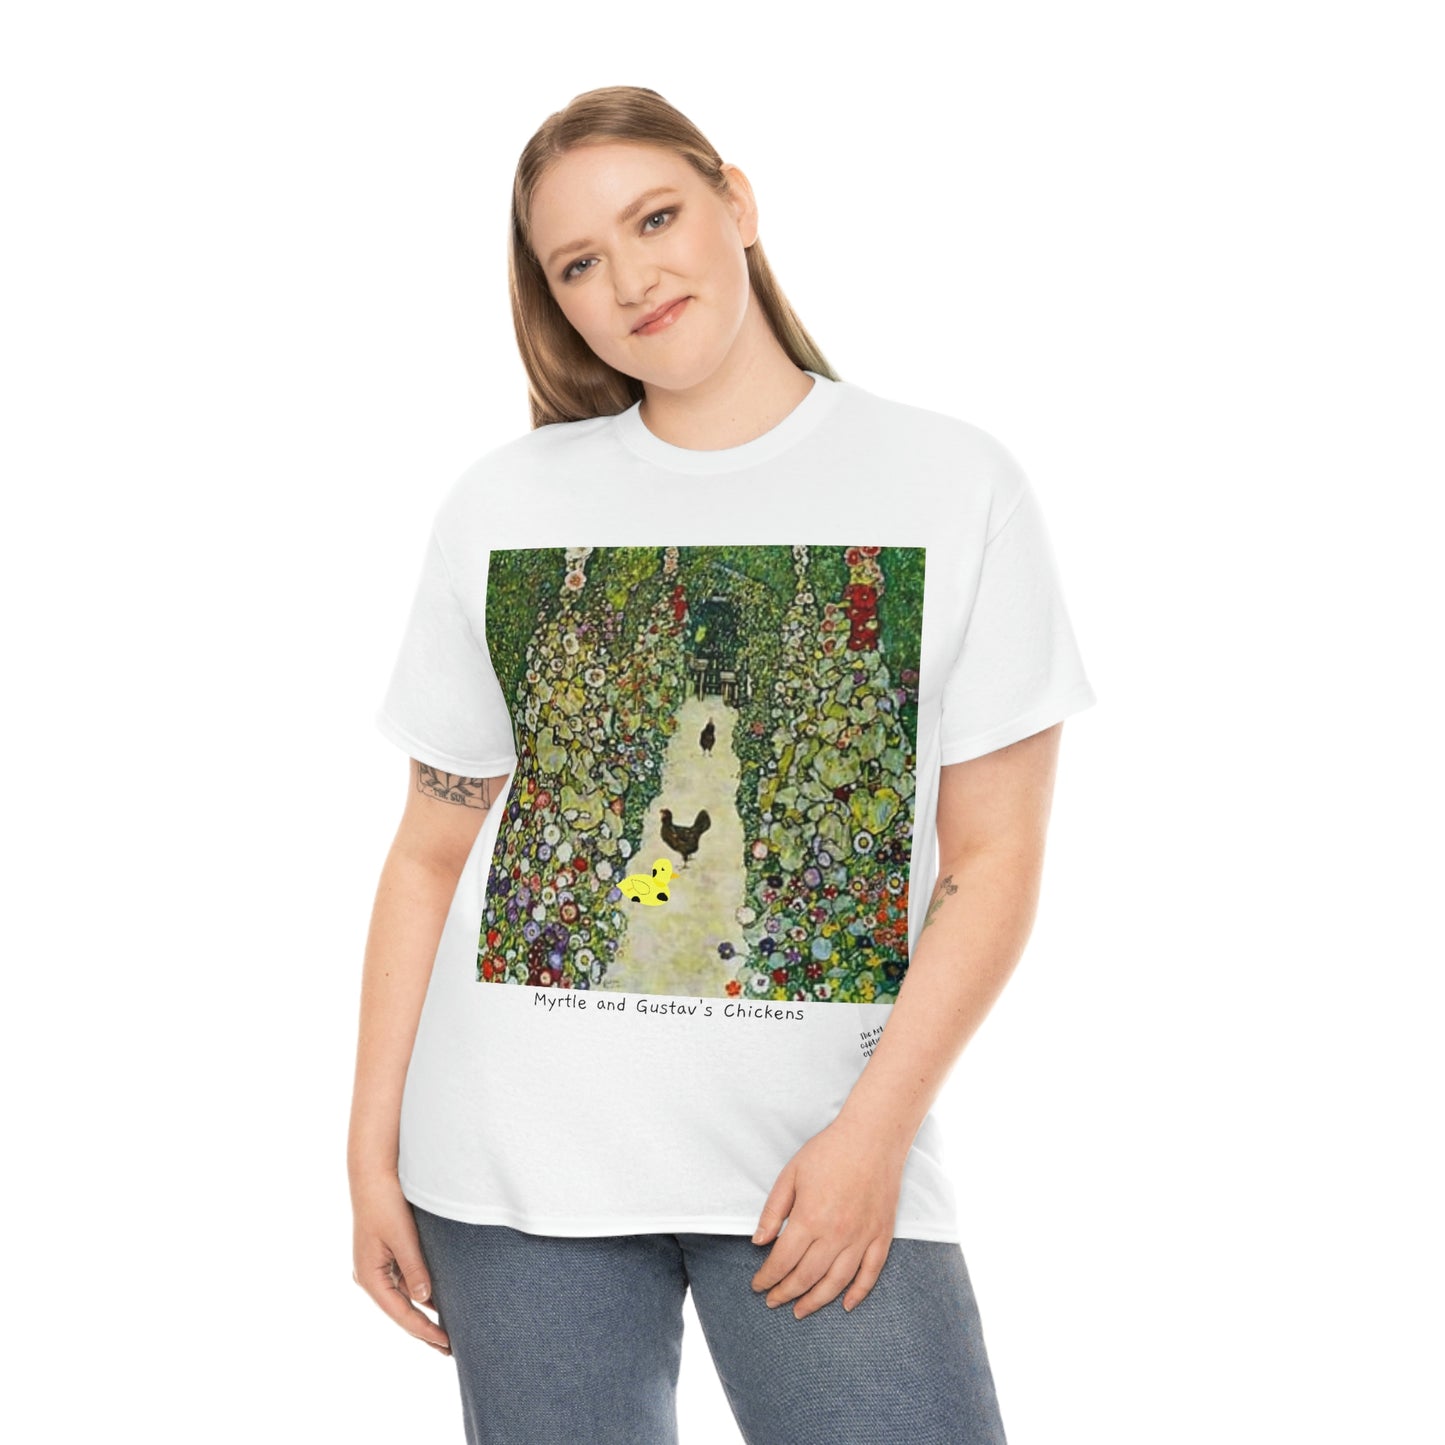 Unisex Heavy Cotton Tee with Myrtle and Gustav's Chickens by D.B. all over print